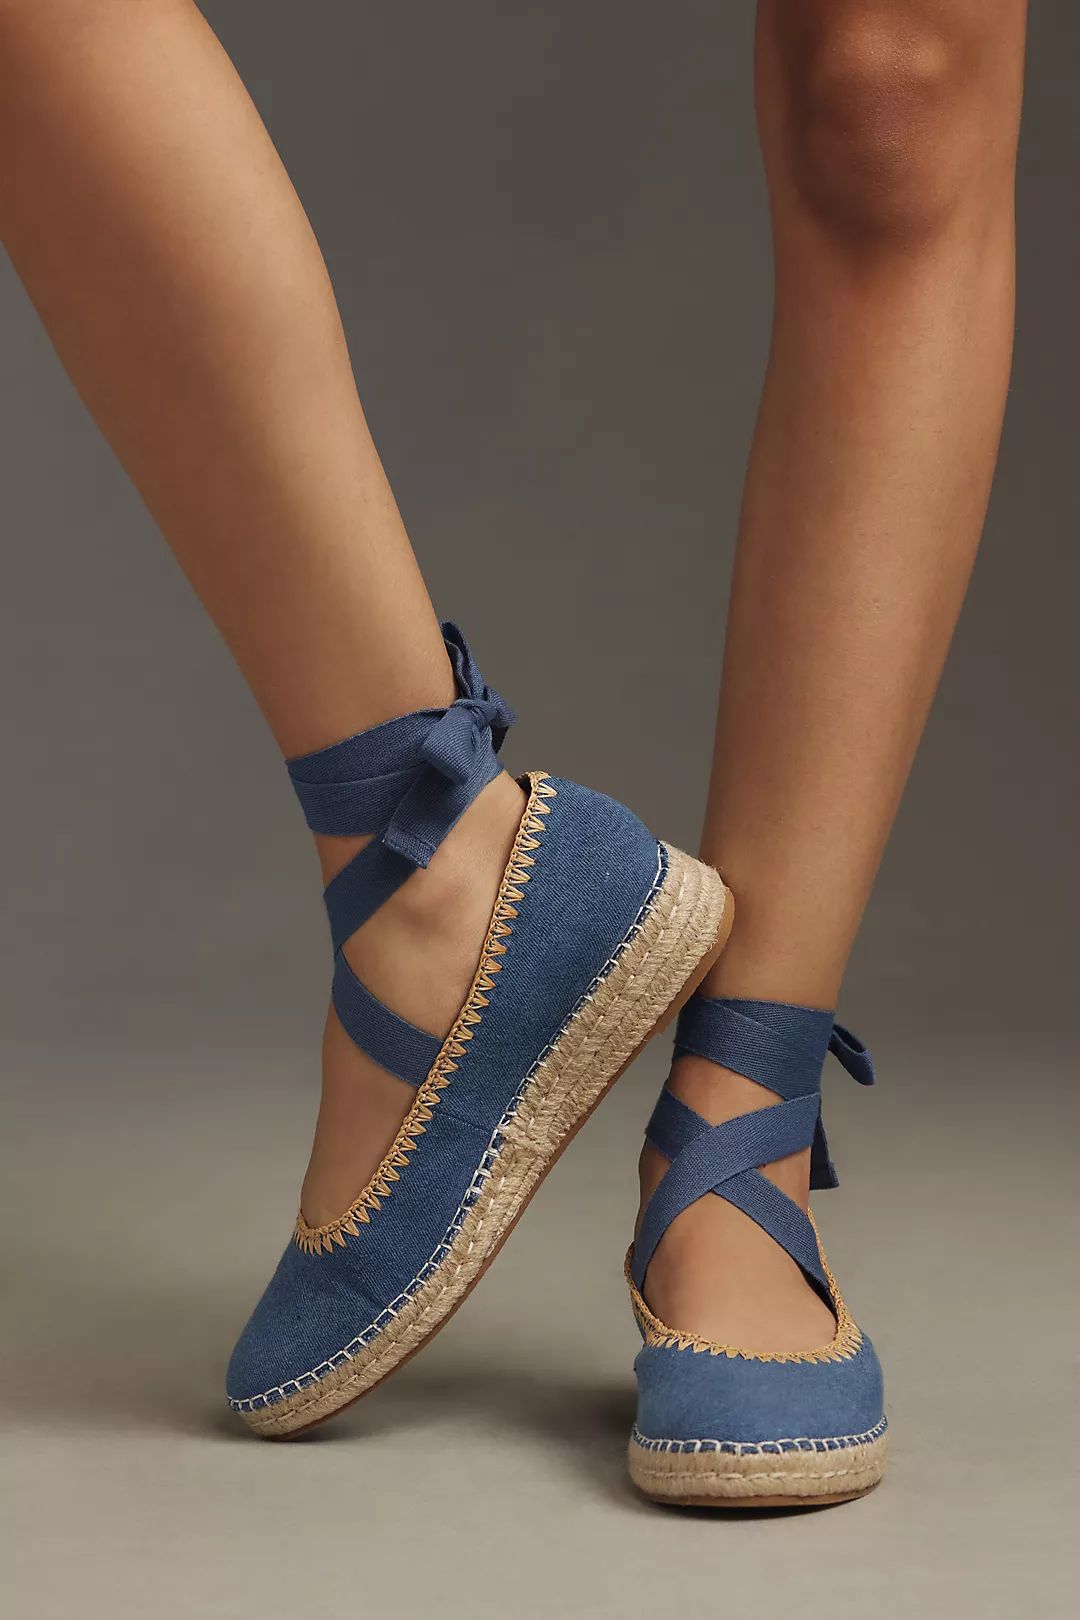 Dolce Vita Morgan Lace-up Flats | Anthropologie (US)